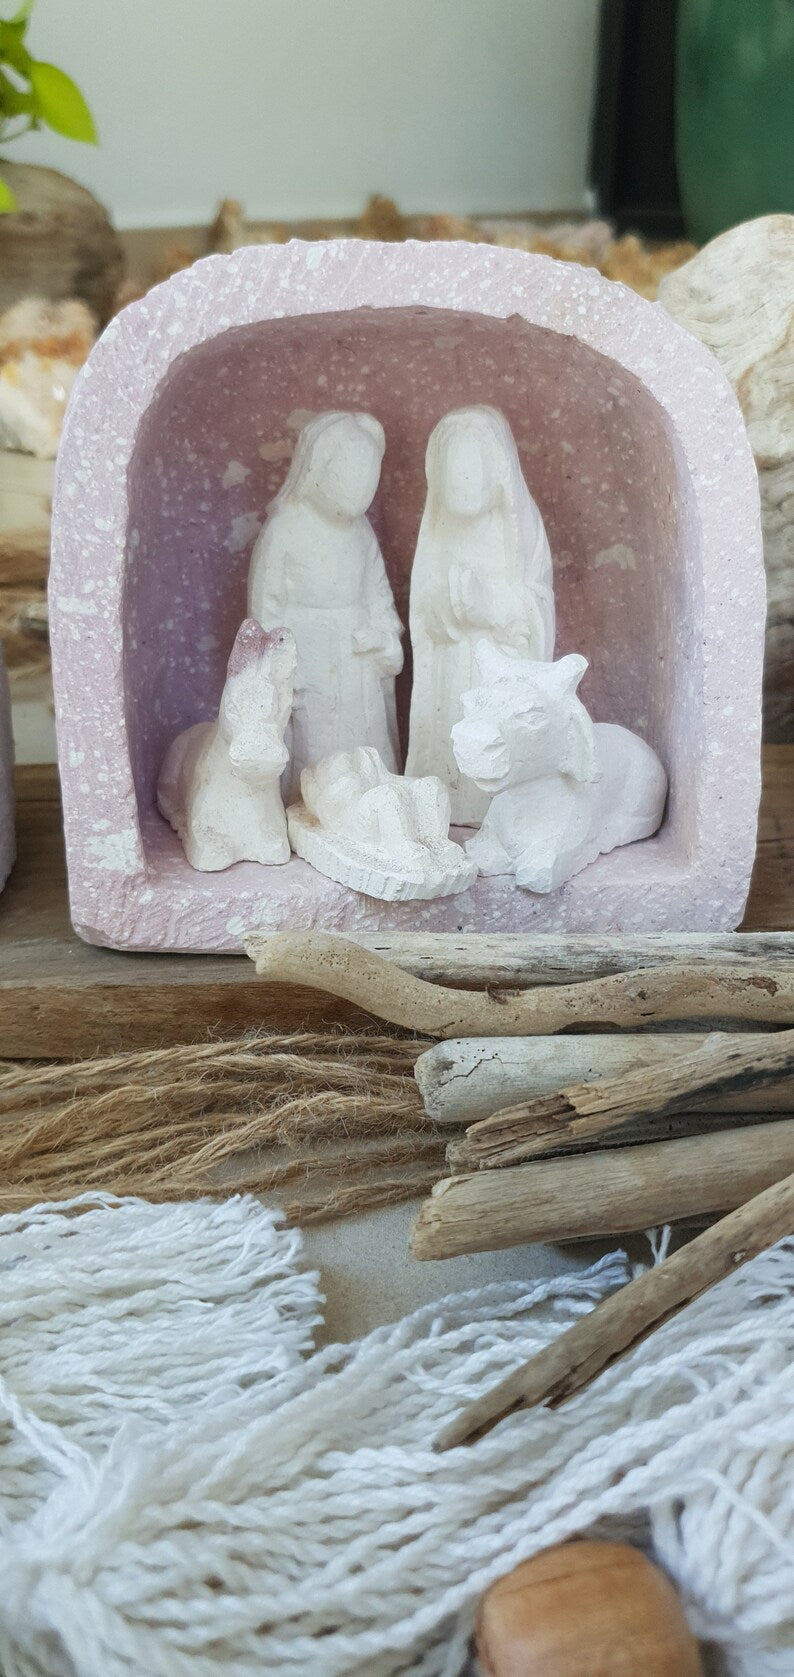 Hand-Carved "Minimalist" Nativity 6 piece set with manger included - Handmade from Soapstone - Each piece and set is unique